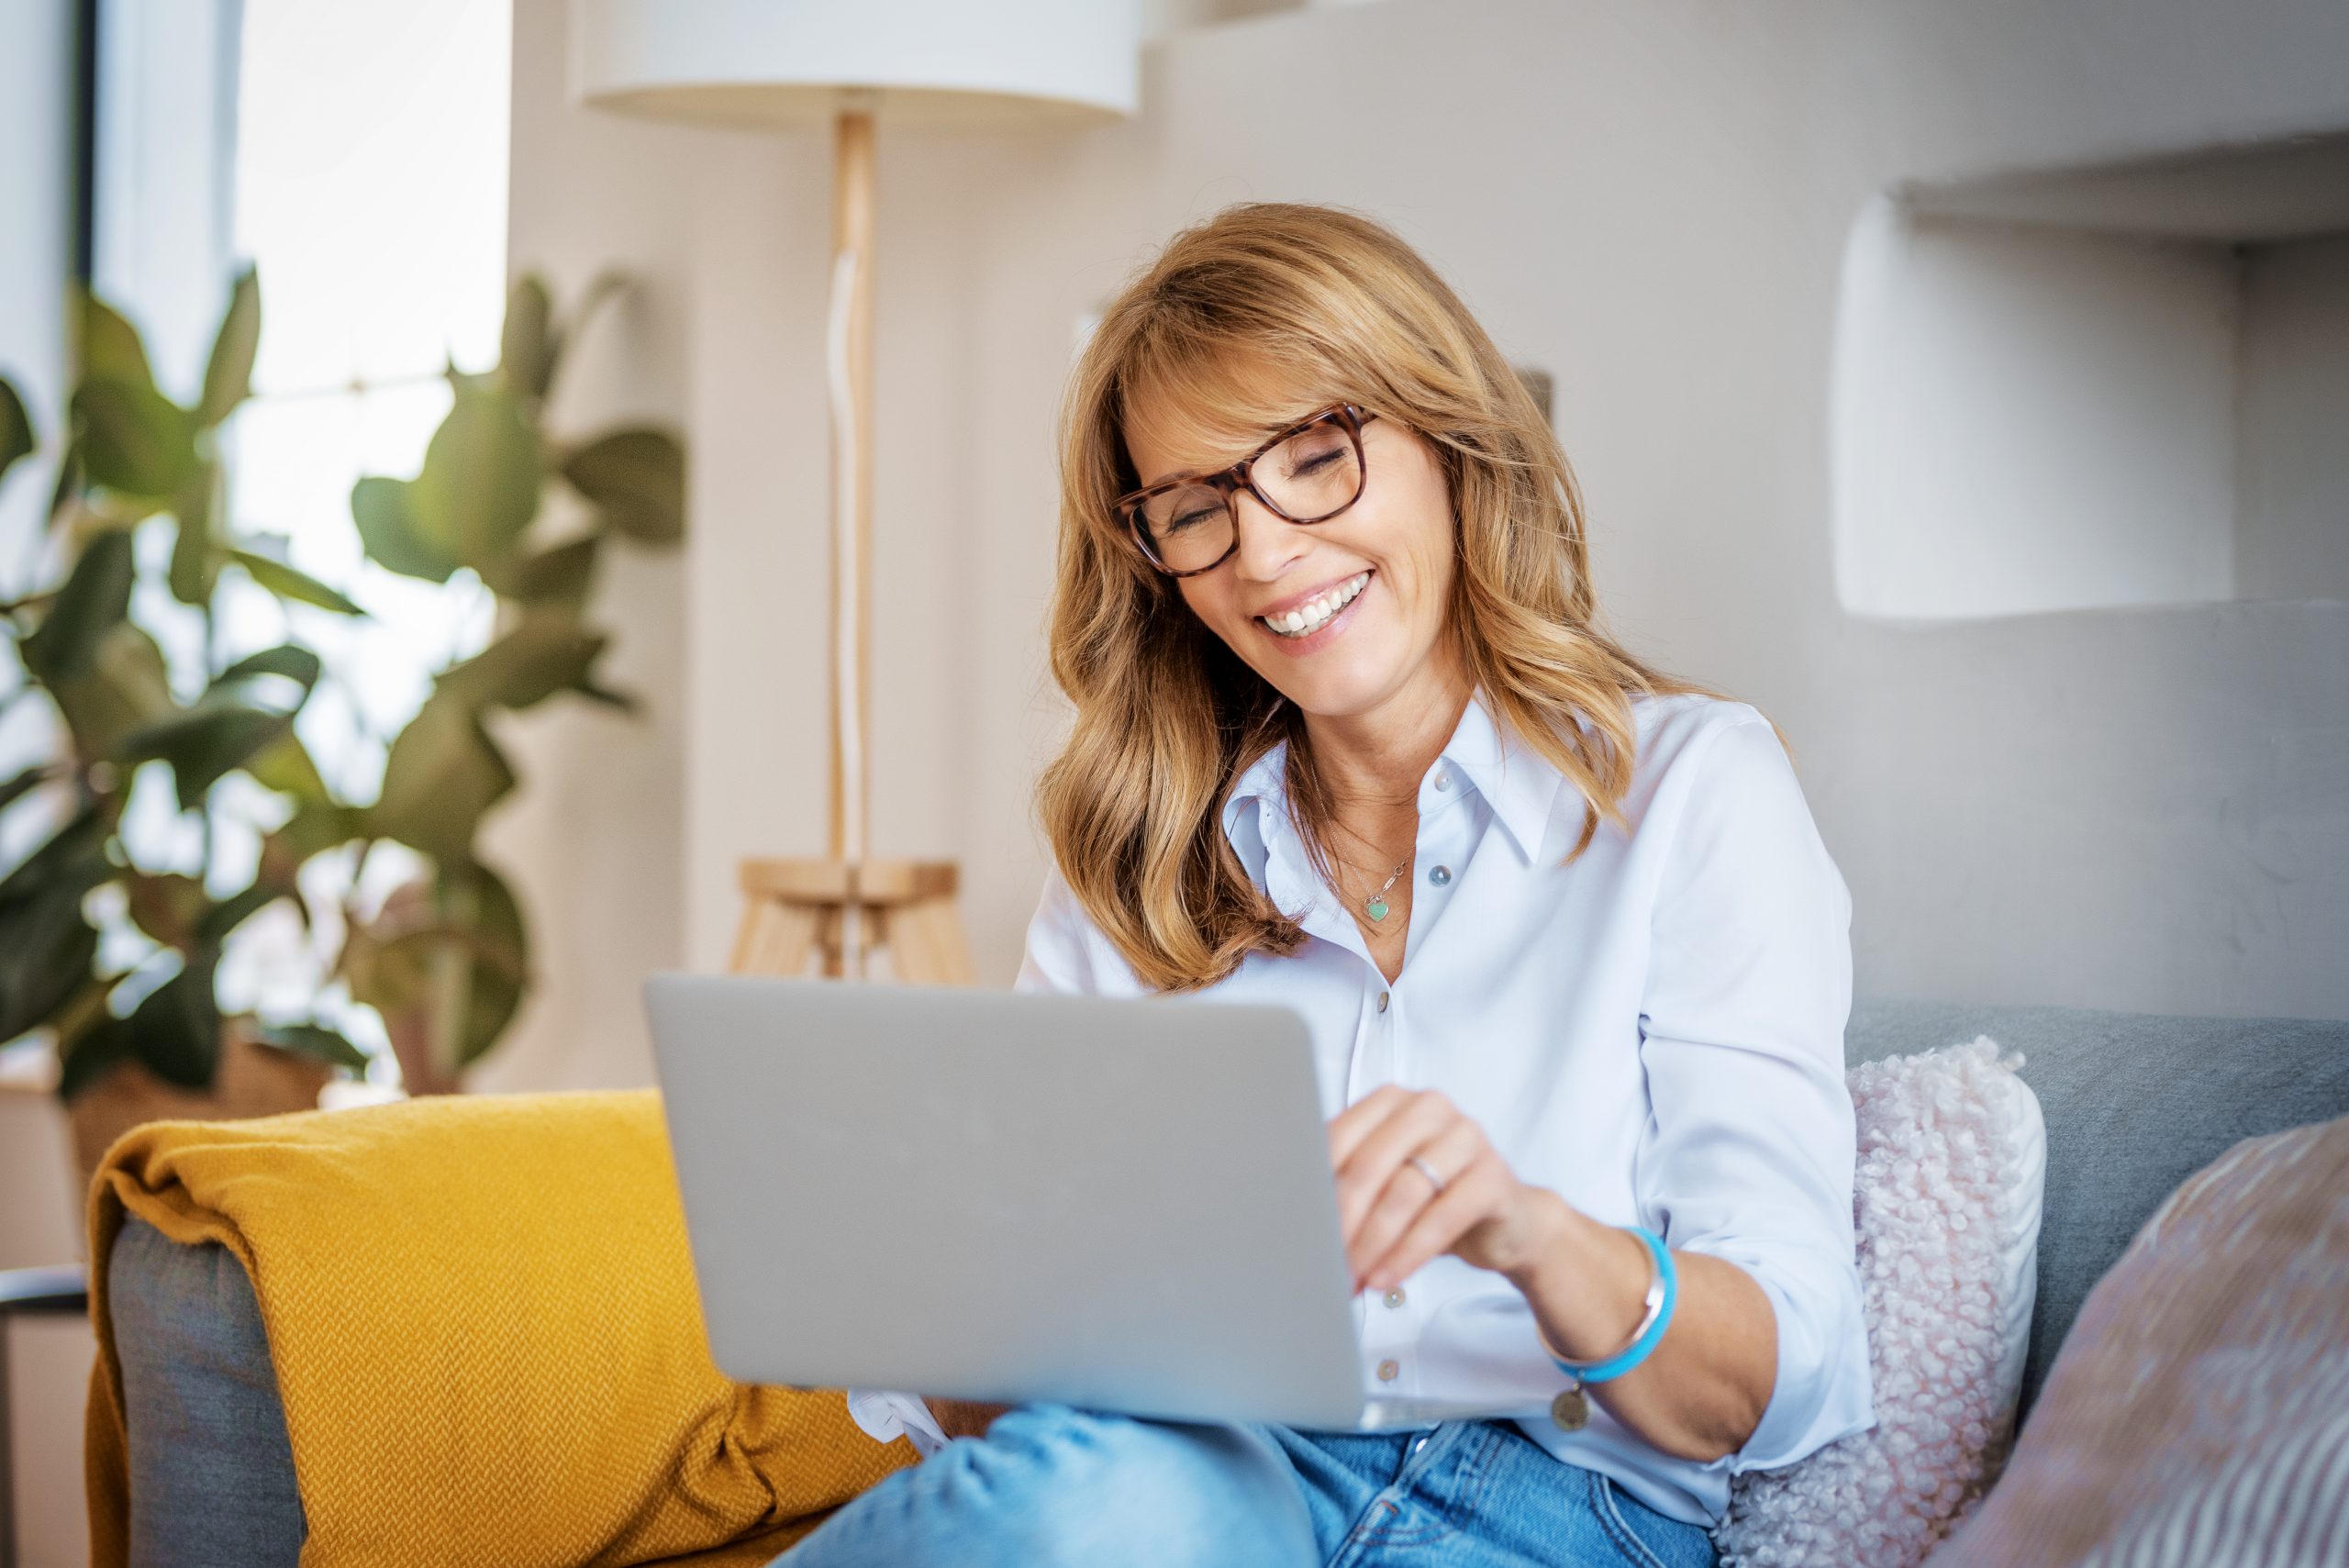 Happy woman using laptop while sitting on the couch at home